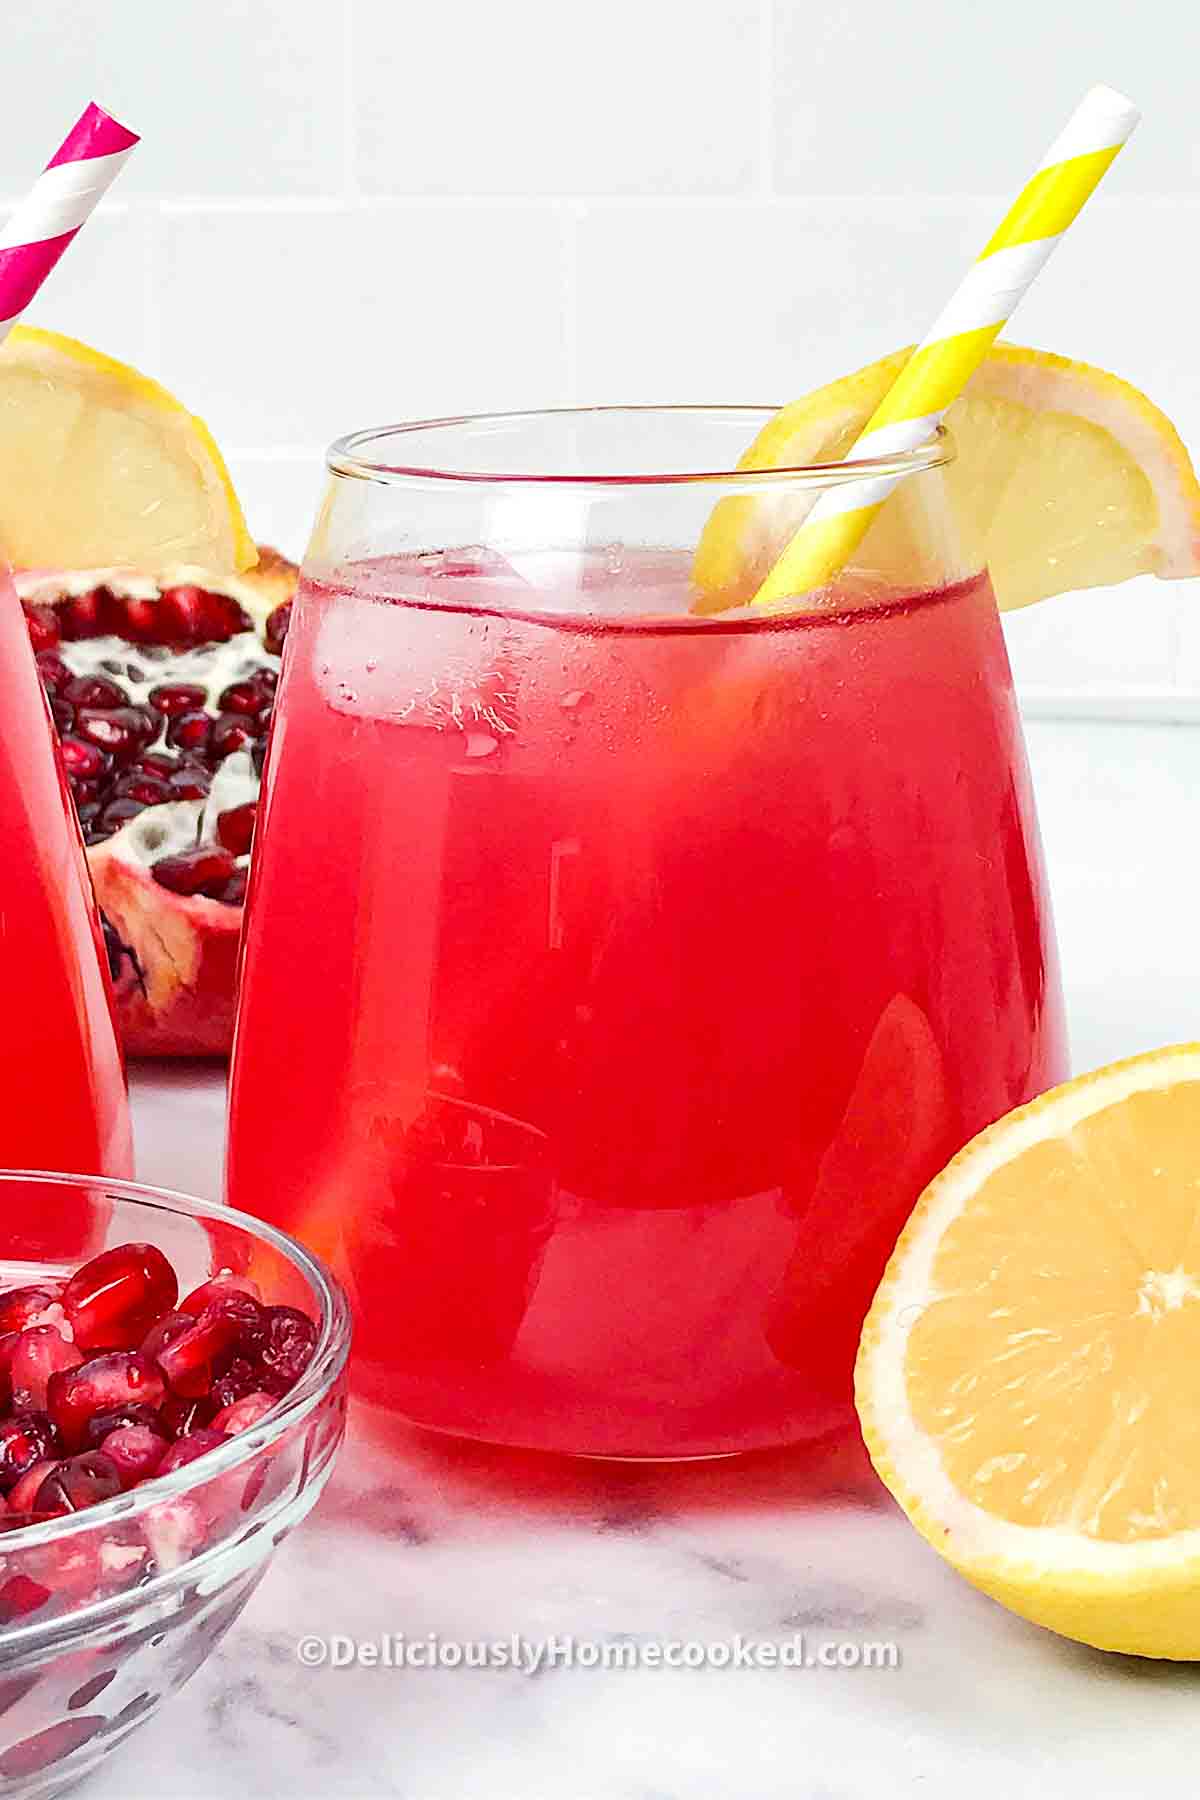 A glass of red juice with a yellow straw in it, lemon slices for garnishing and some open faced pomegranates and a small glass bowl filled with pomegranate seeds 